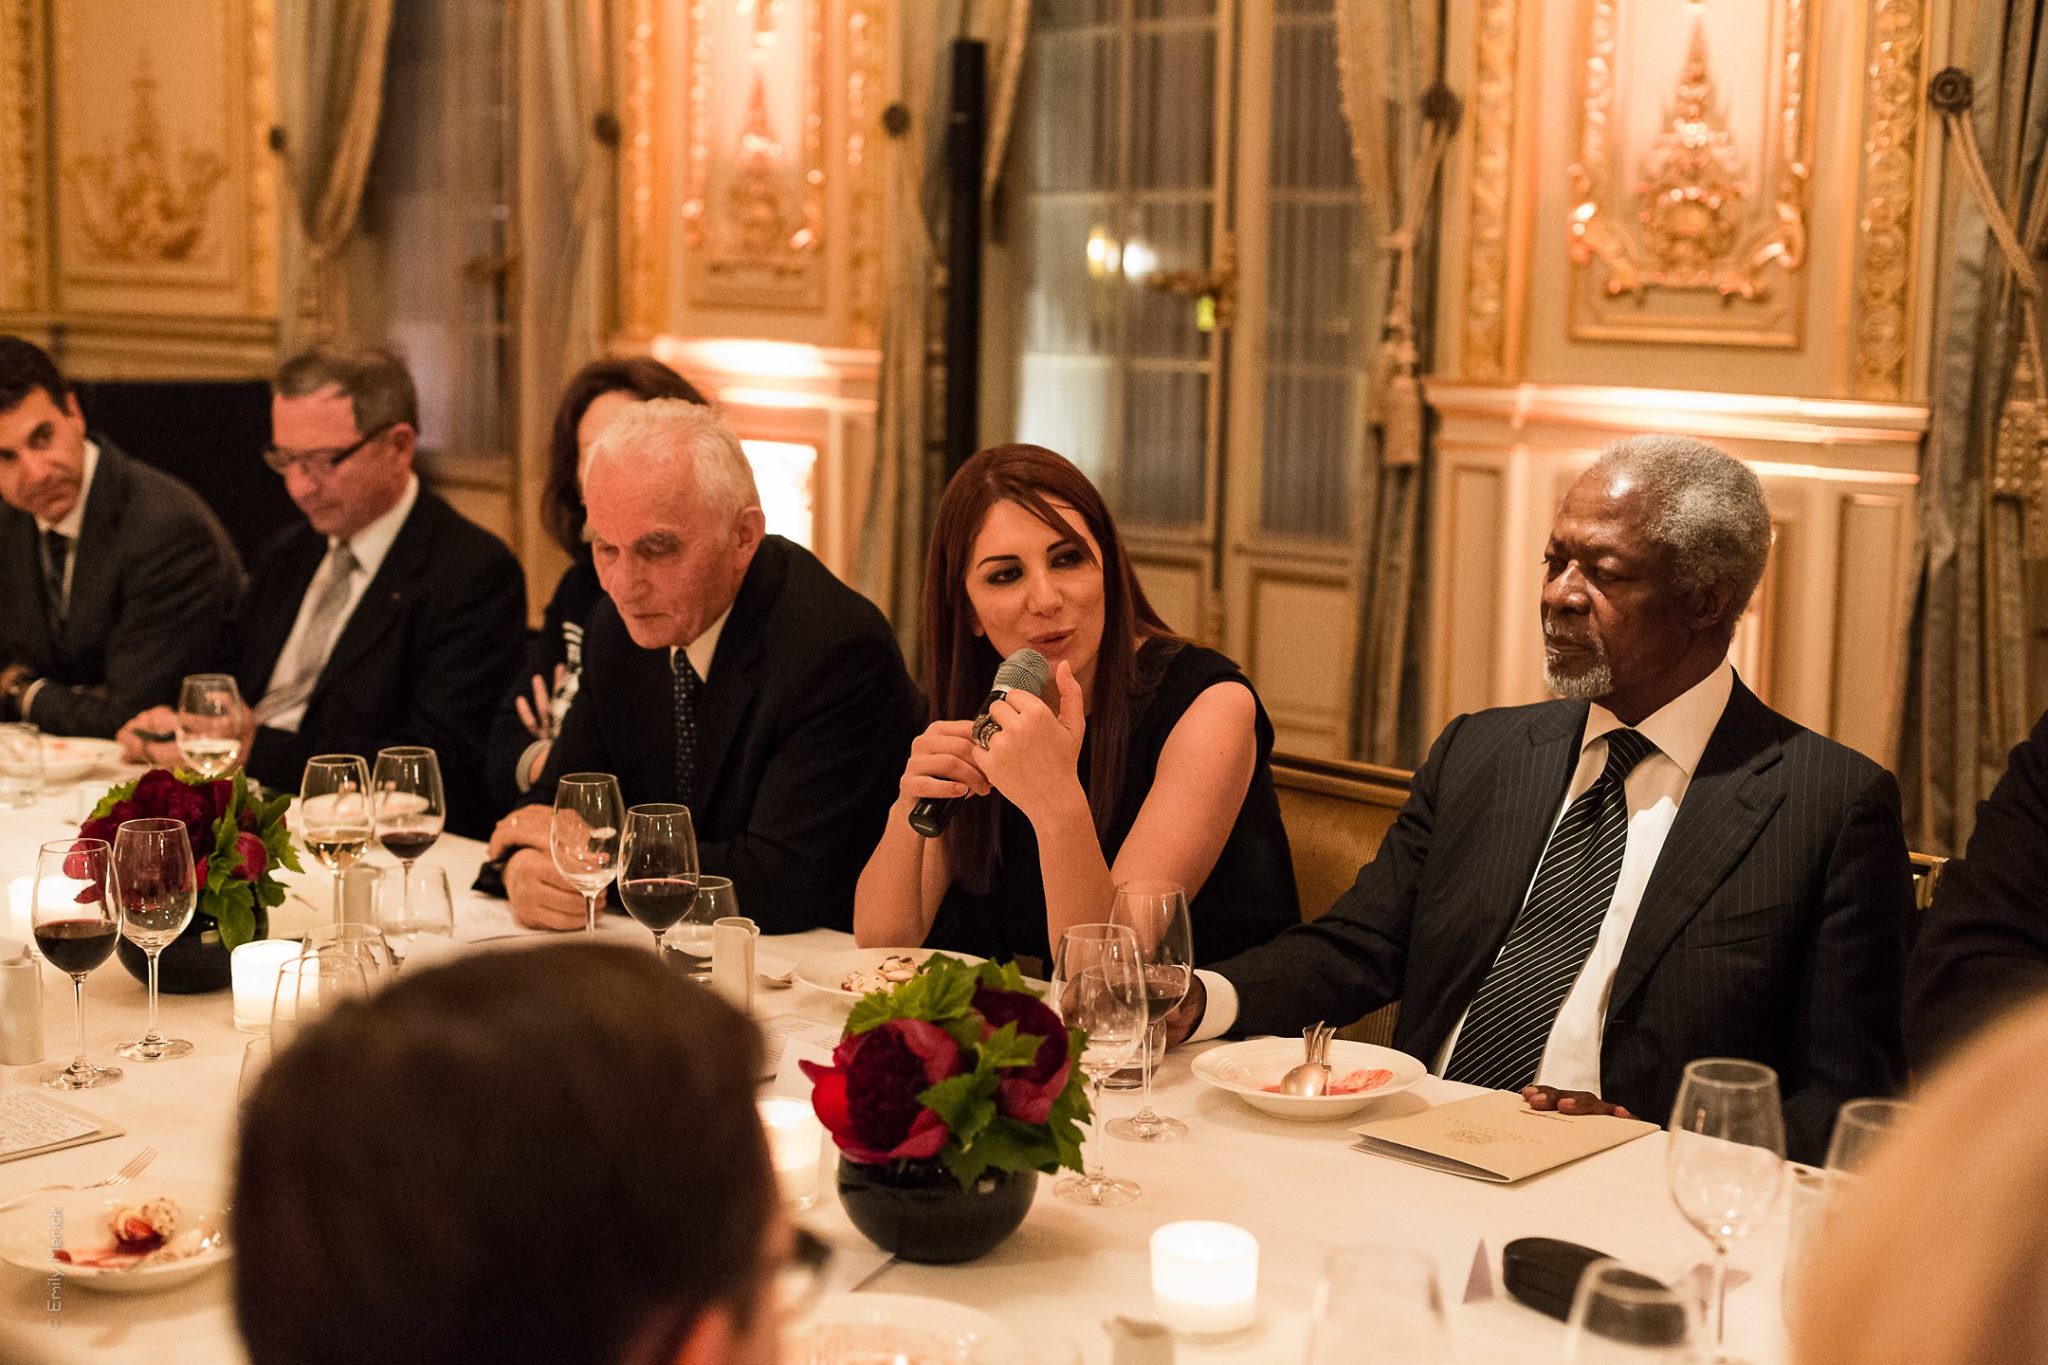 Randa-Kassis-between-Kofi-Annan-and-Yasar-Yakis-former-Foreign-Affairs-Minister-of-Turkey-Terzi.-Conference-CPFA-nuclear-security-6th-June-Paris